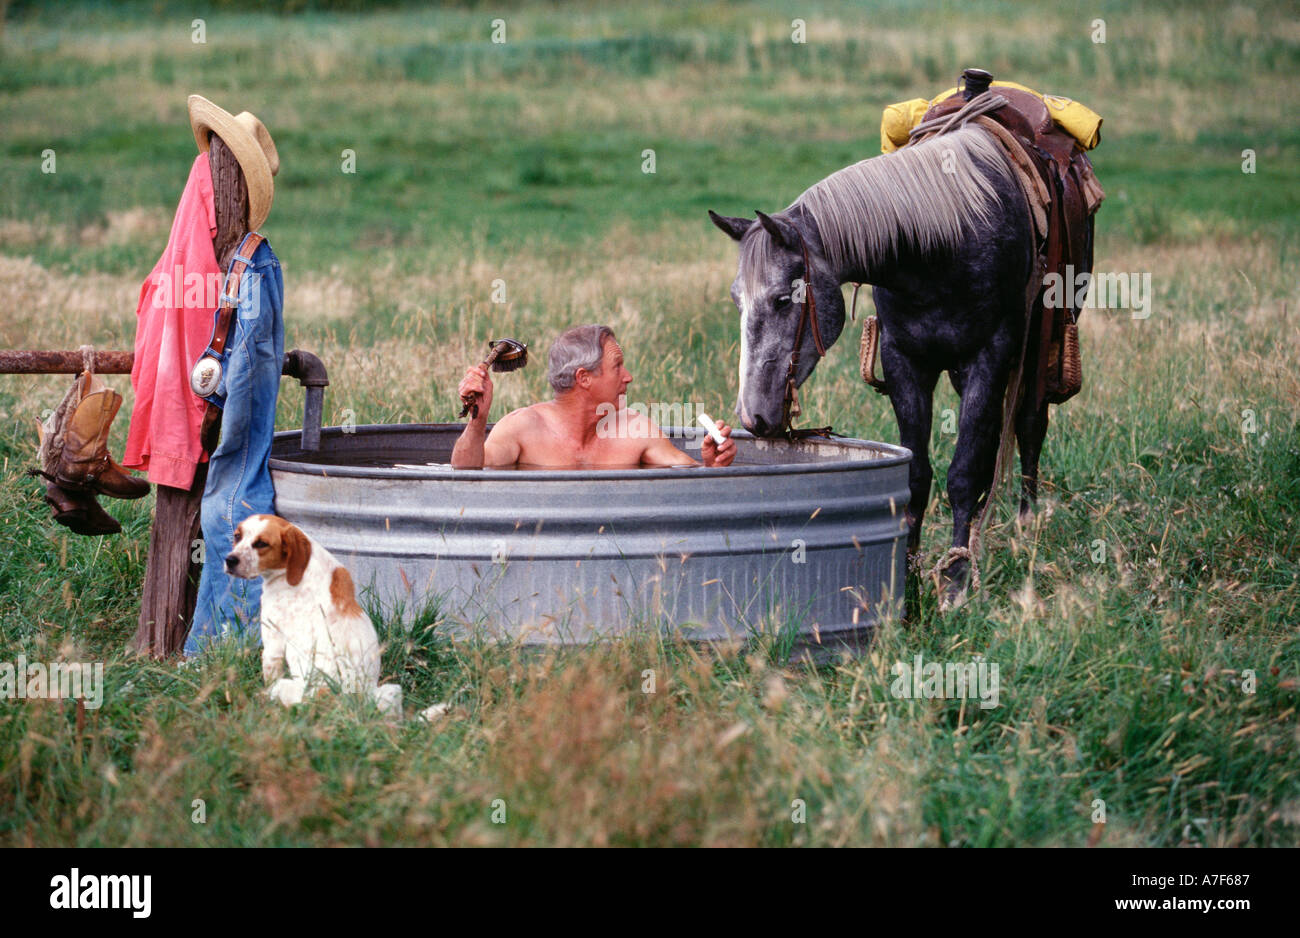 Cowboy bathing  outdoors in a water tank Stock Photo